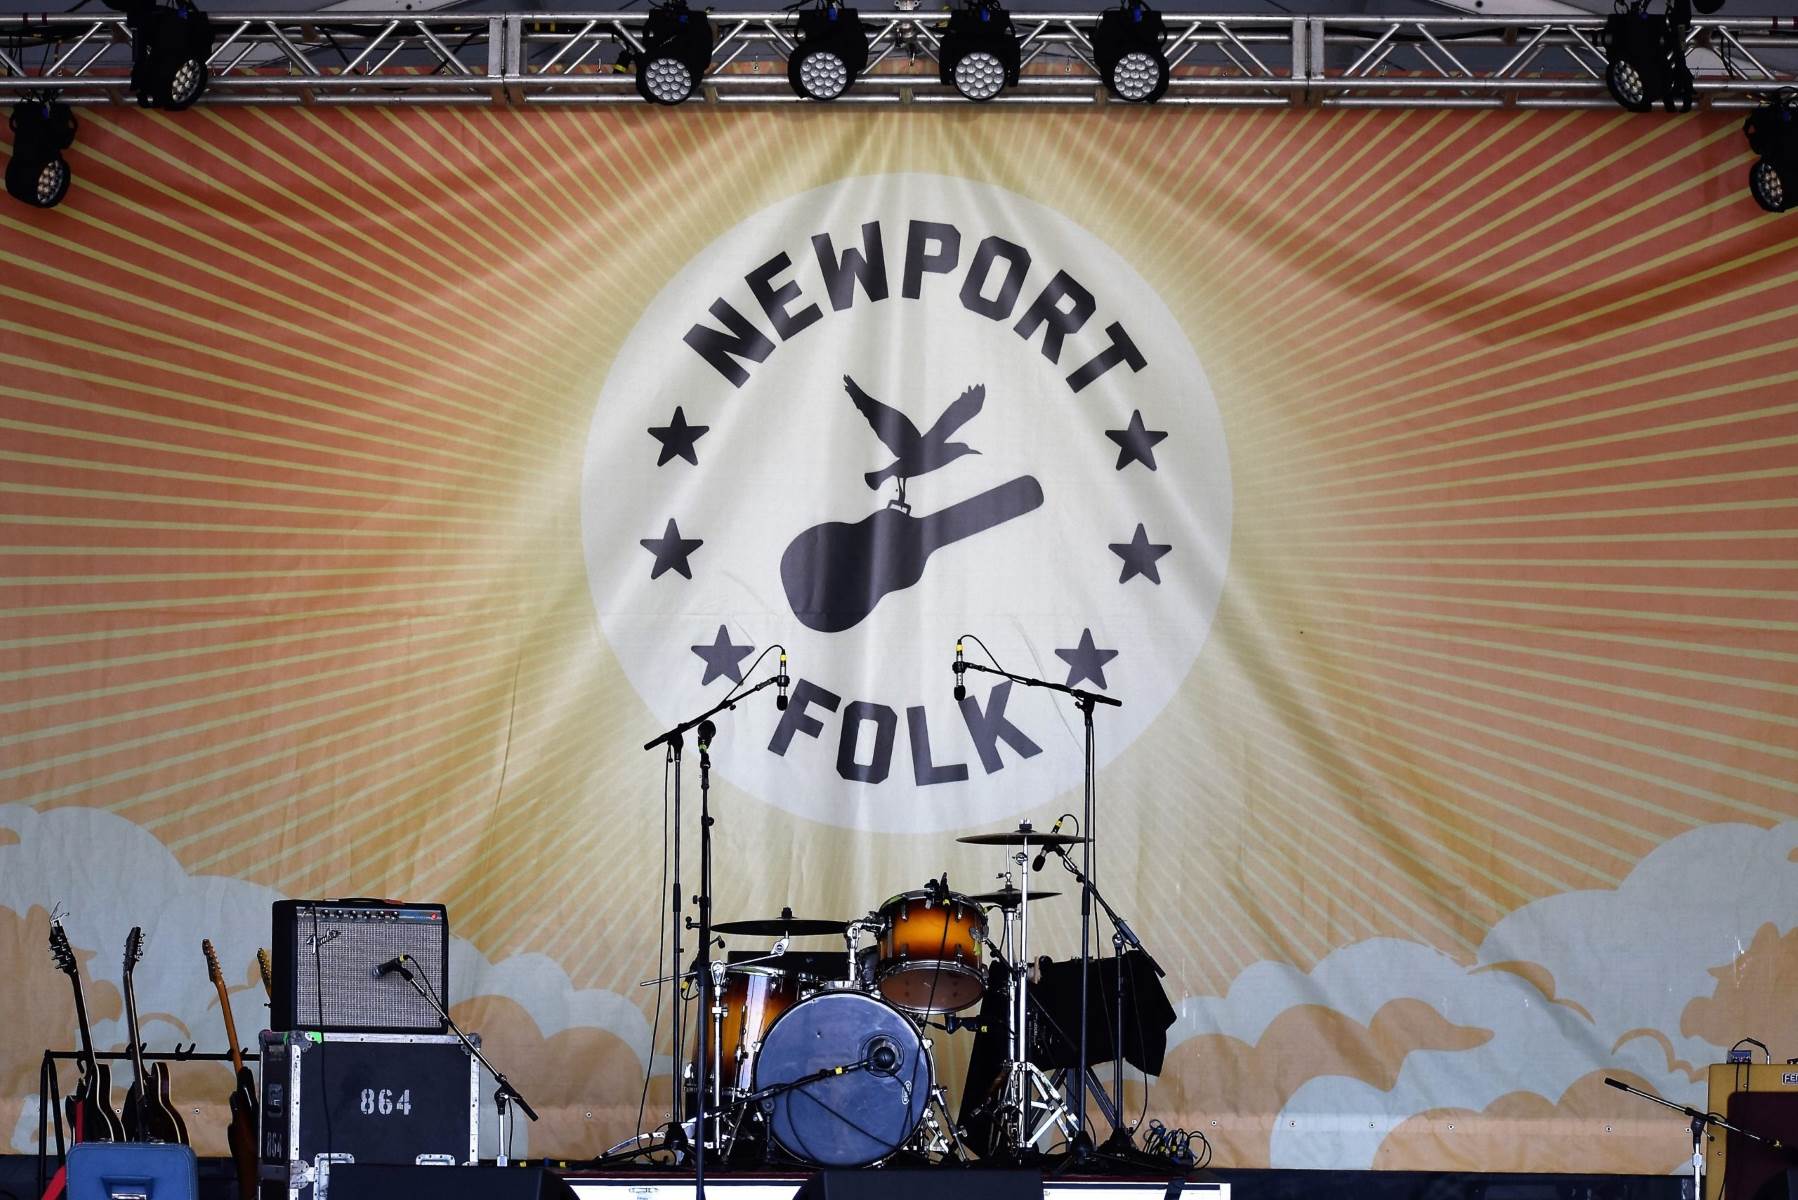 How Much Do Tickets To The Newport Folk Festival Cost